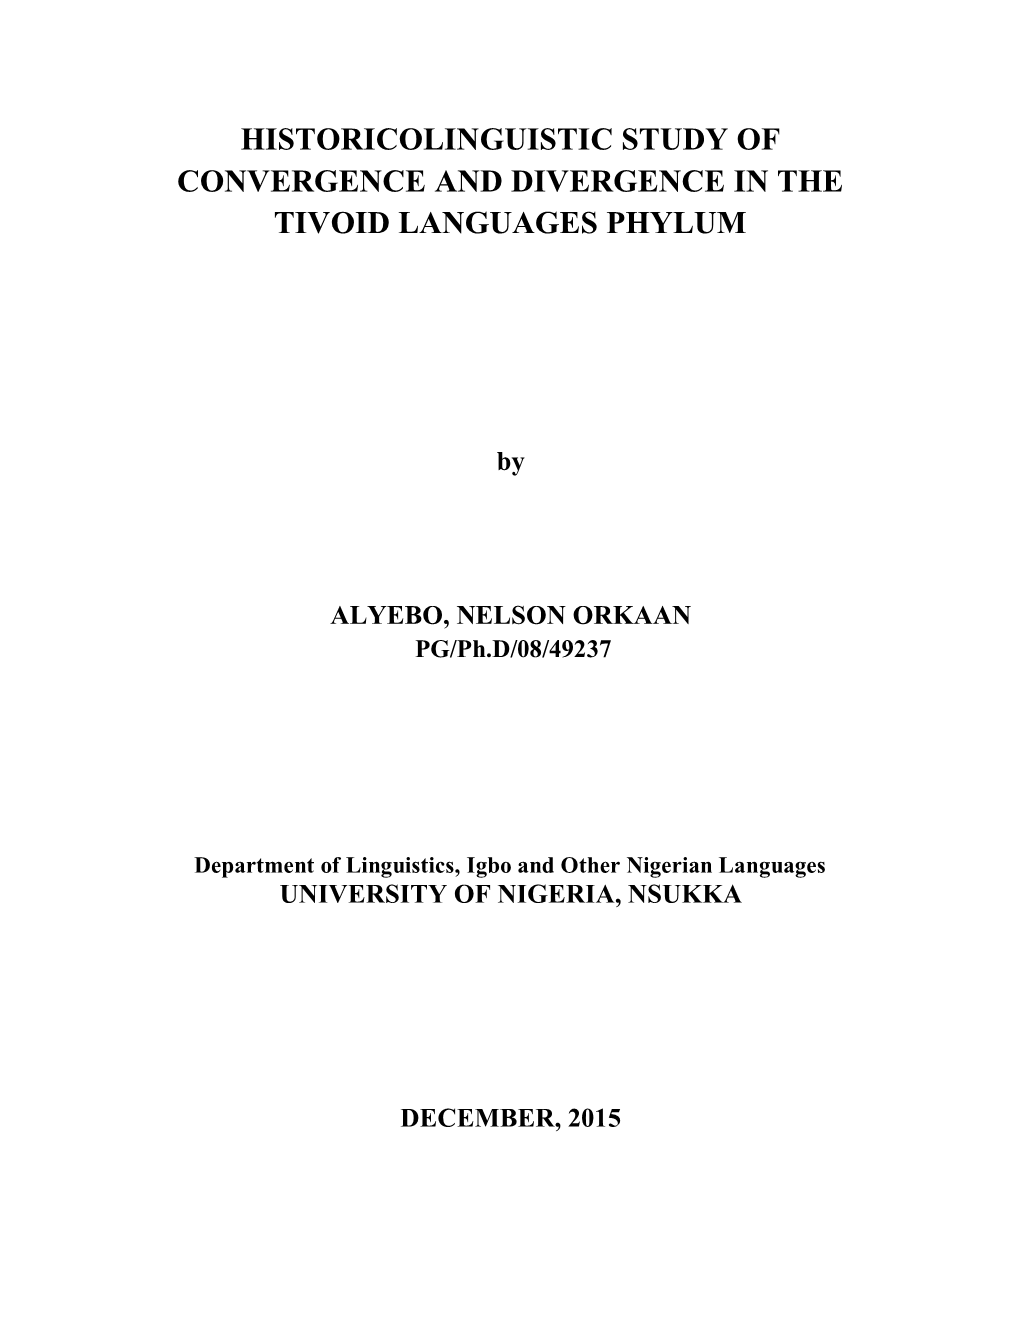 Historicolinguistic Study of Convergence and Divergence in the Tivoid Languages Phylum